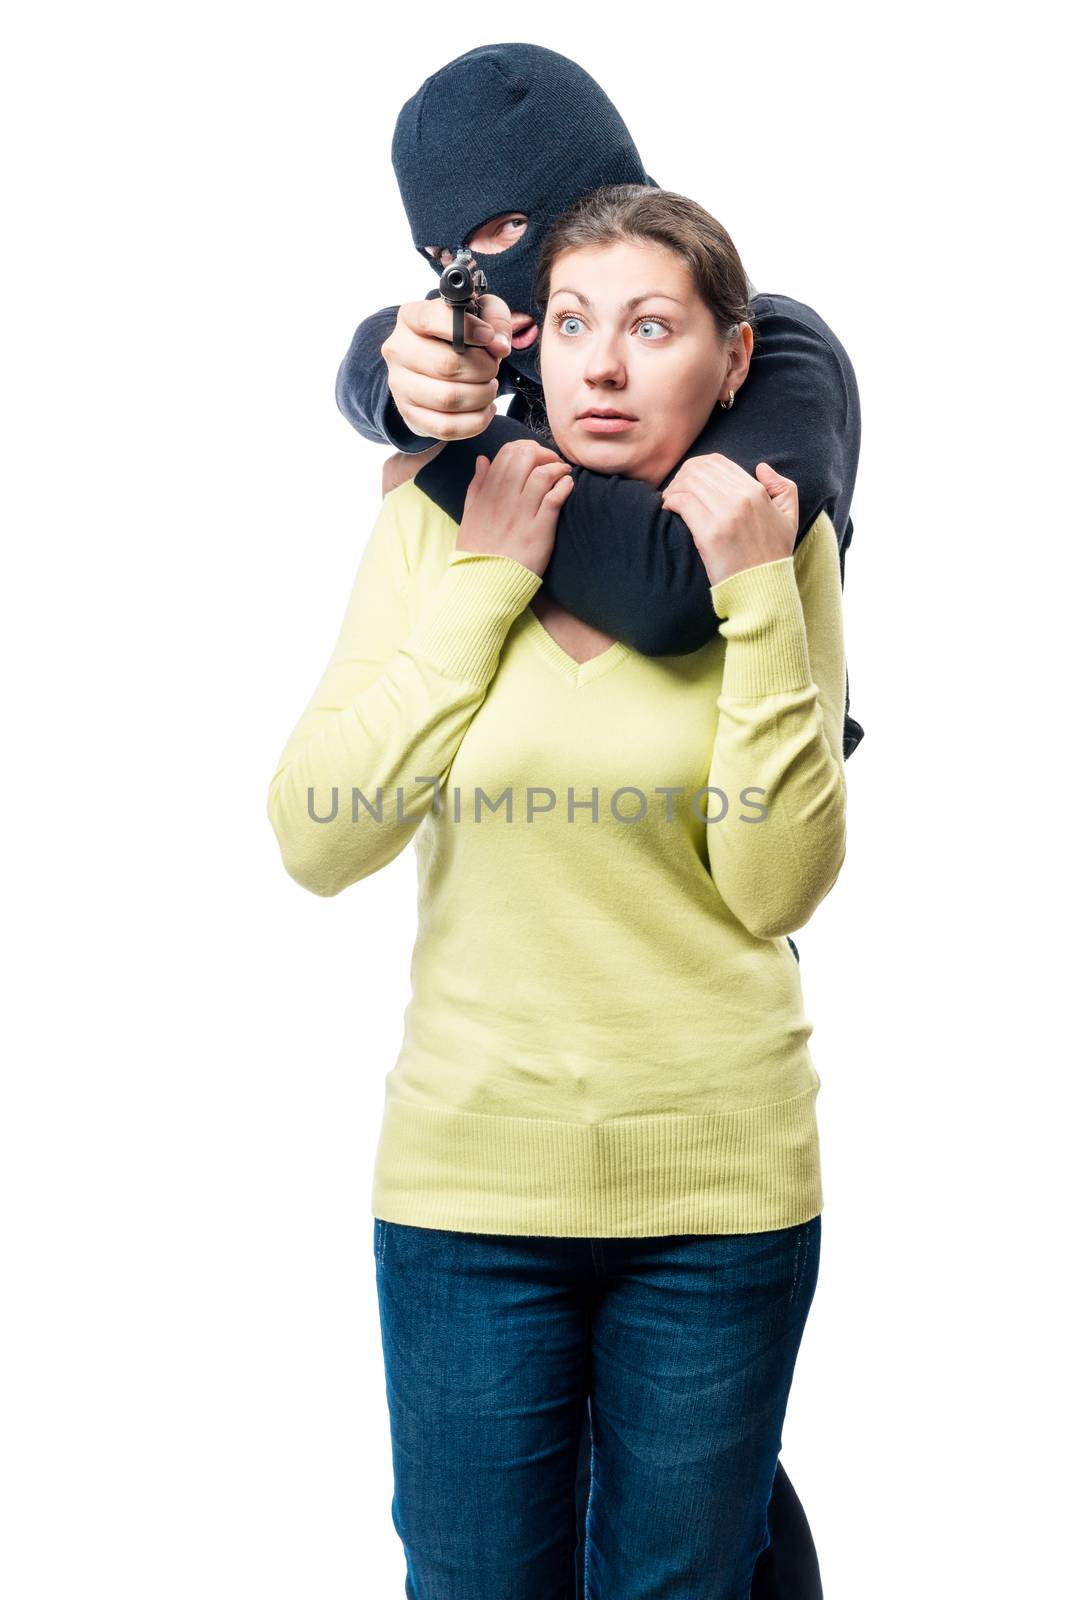 terrorist with his victim on a white background isolated